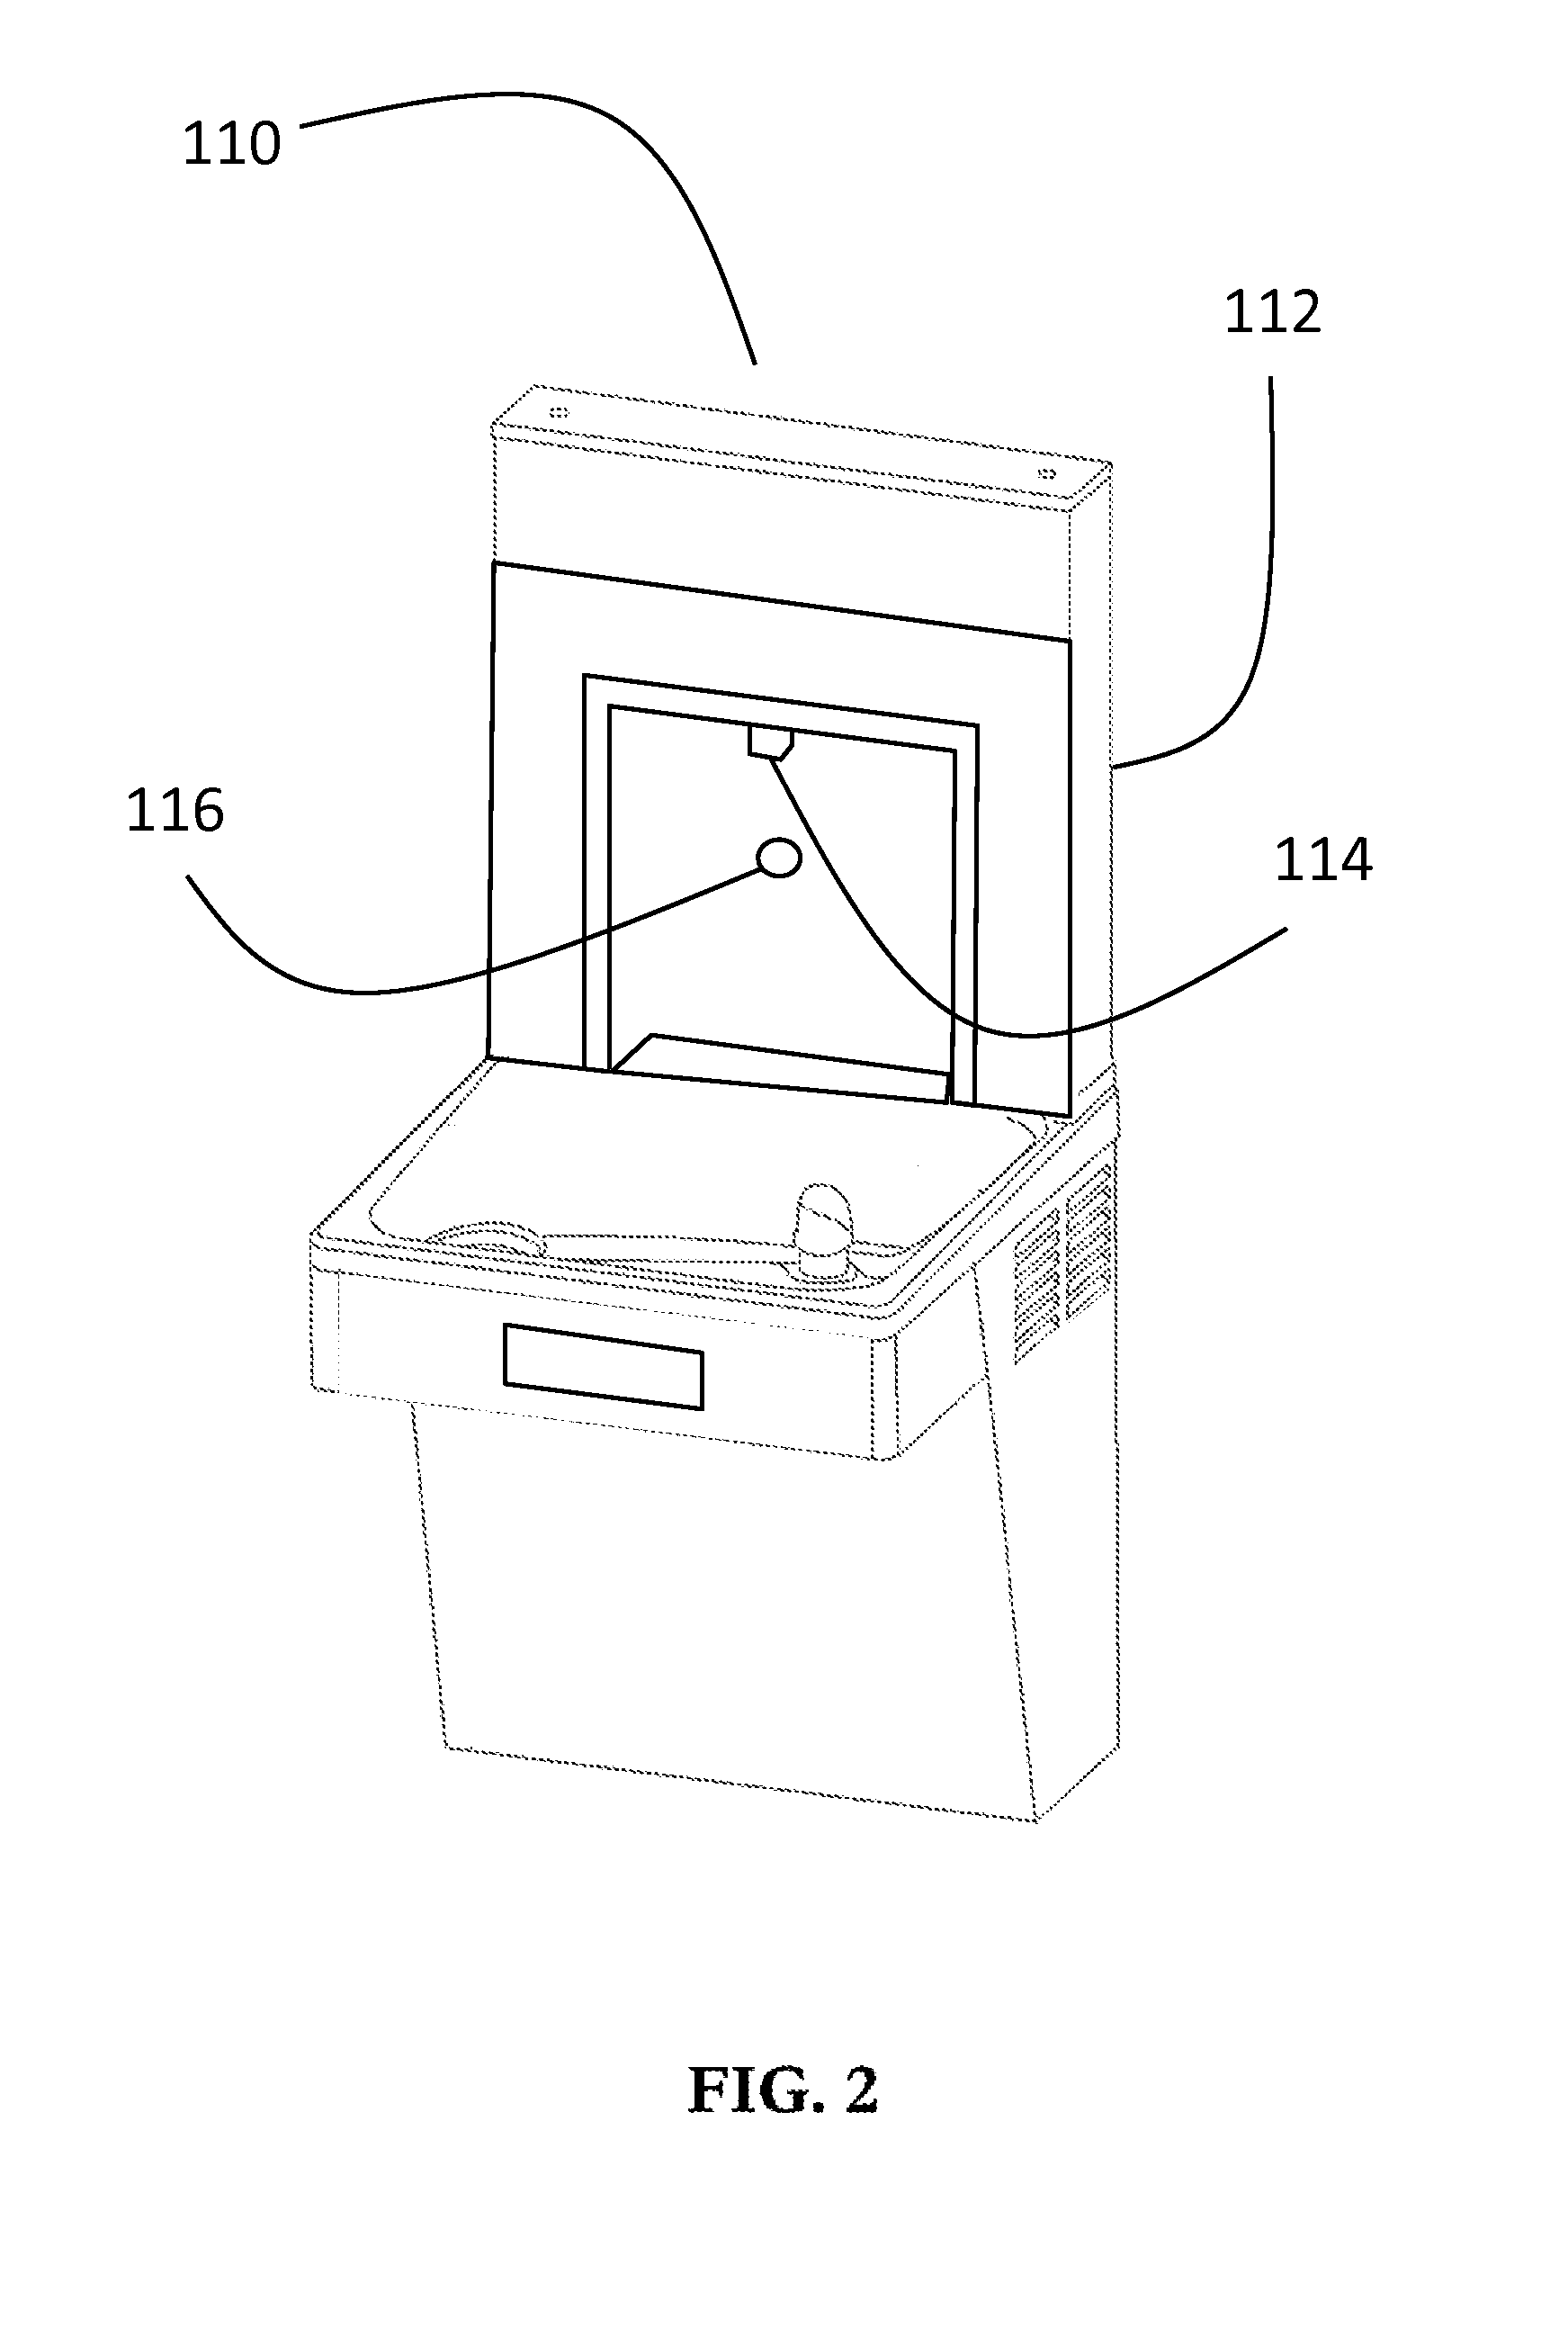 Apparatus and method for operation of networked drinking fountains